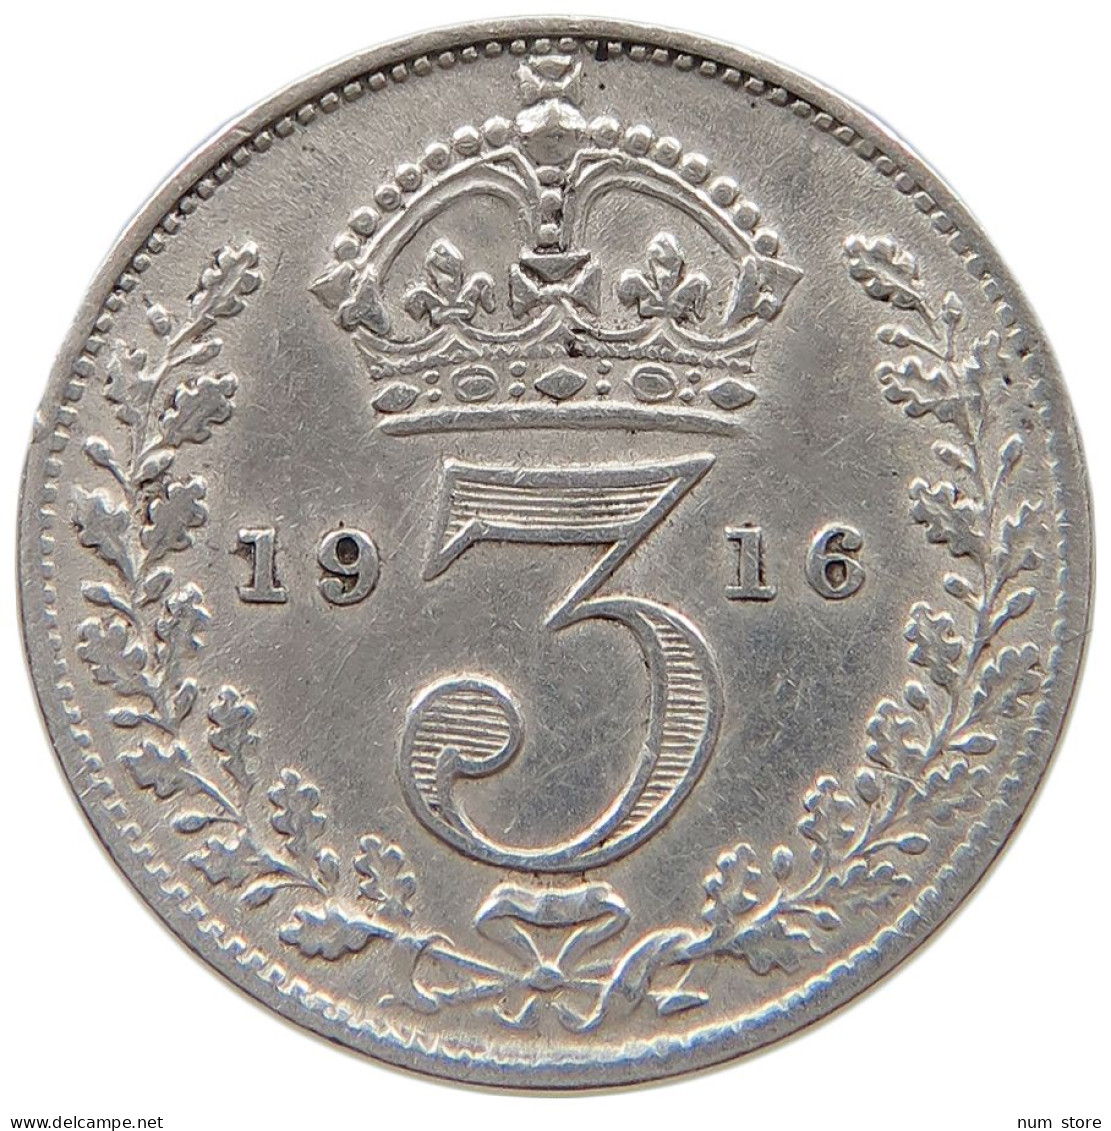 GREAT BRITAIN THREEPENCE 1916 George V. (1910-1936) #a052 0471 - F. 3 Pence